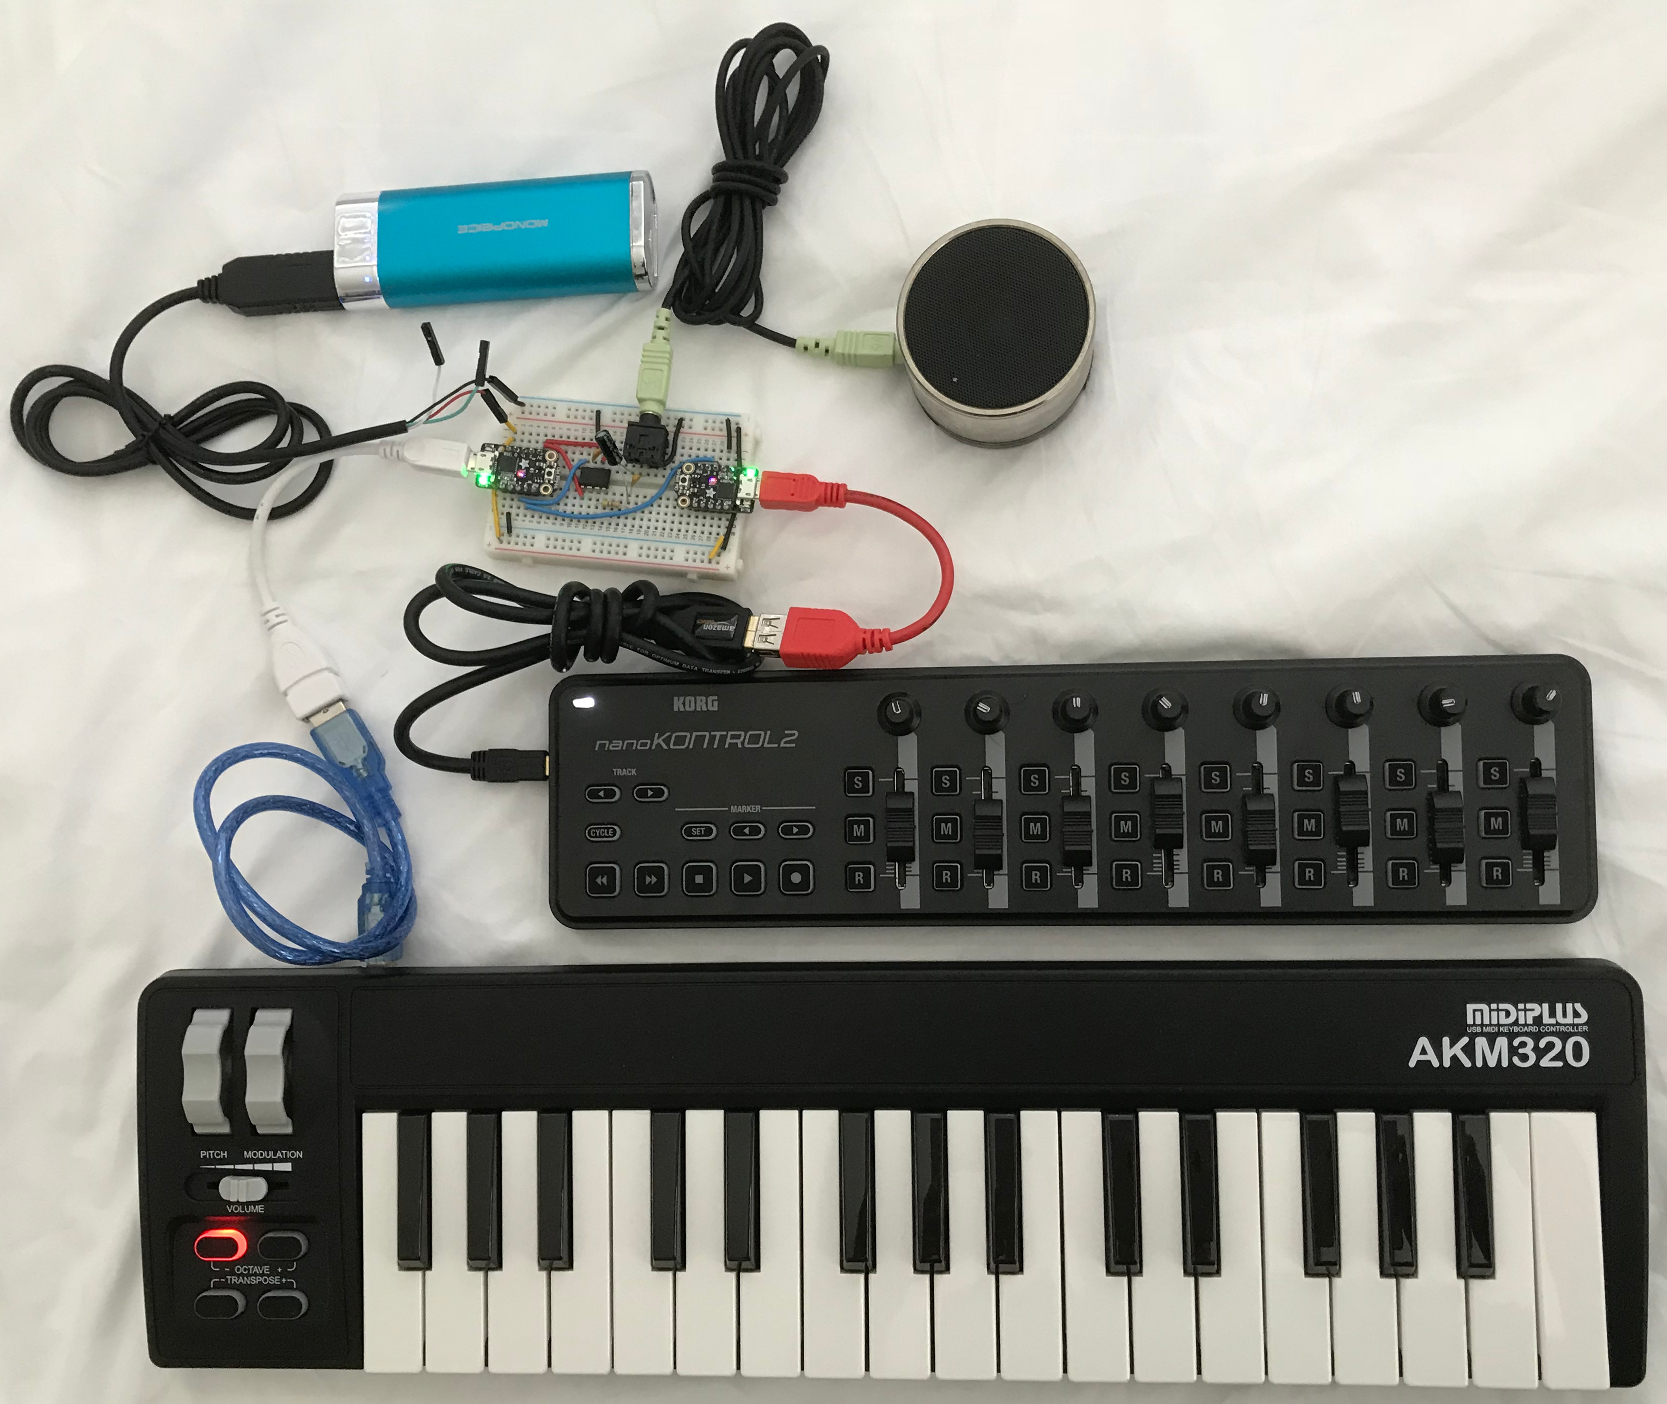 dsp-G1 synth chip with keyboard and control board